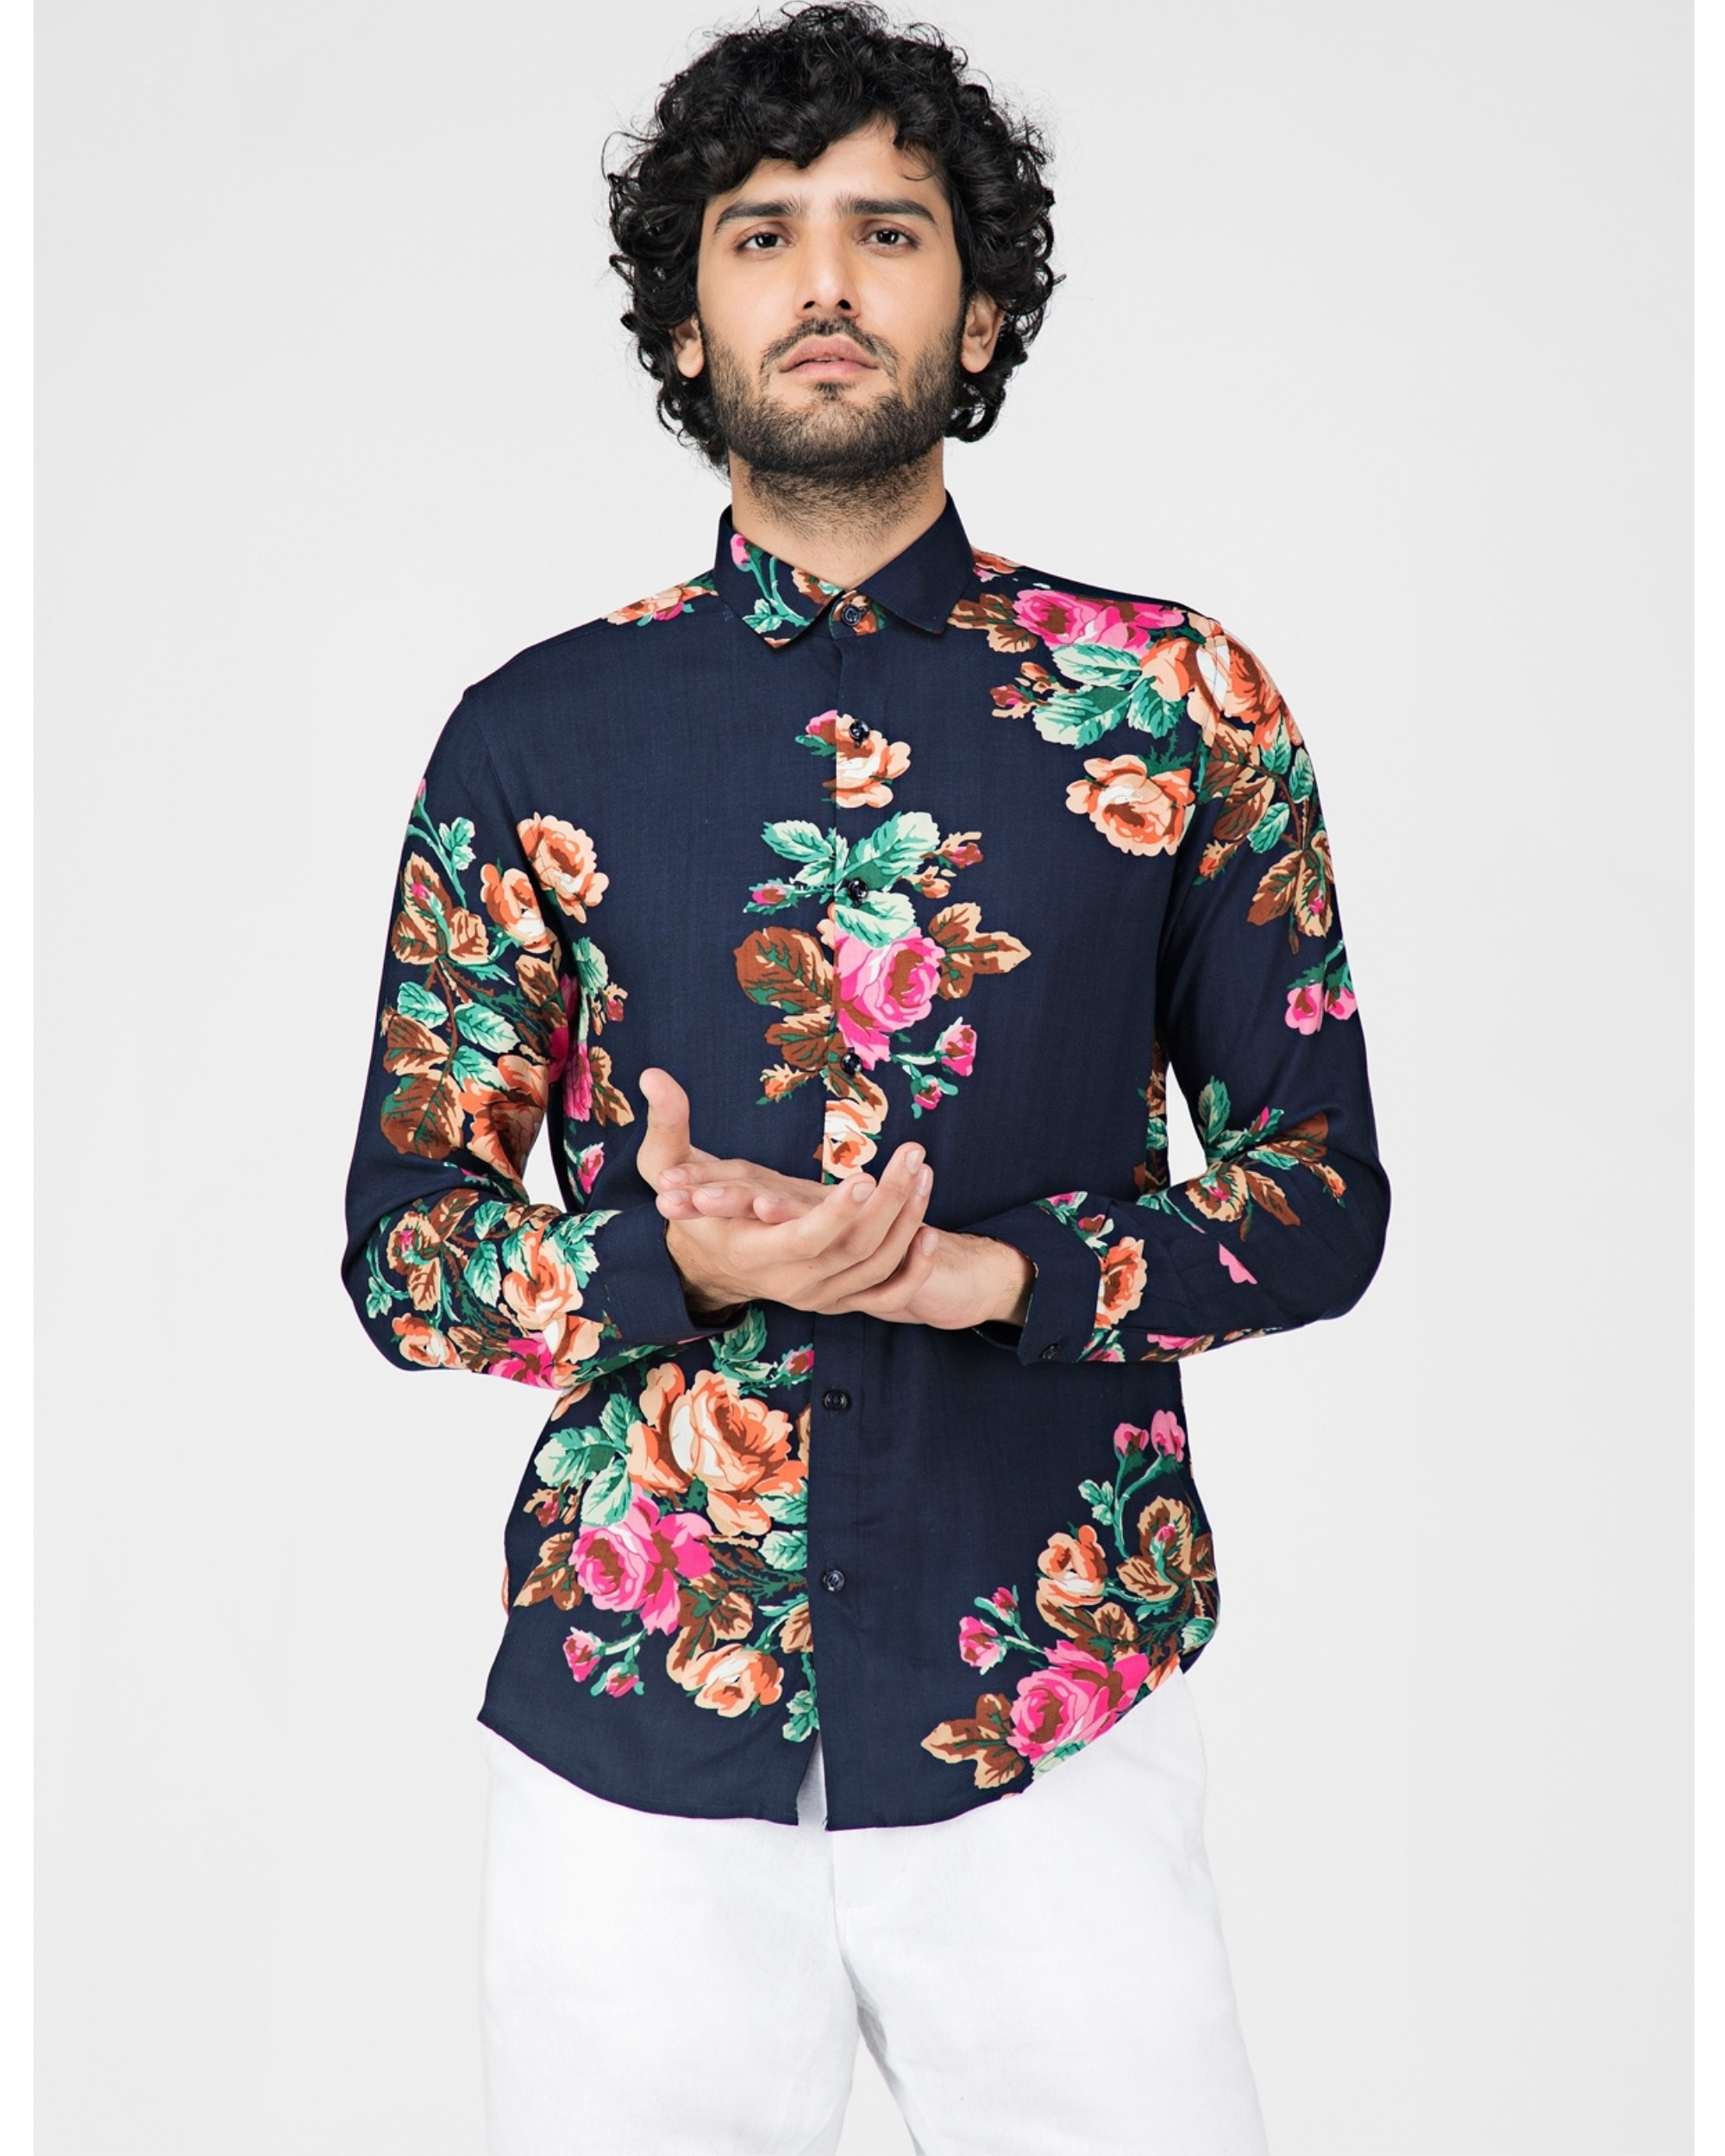 Navy blue floral printed casual shirt ...